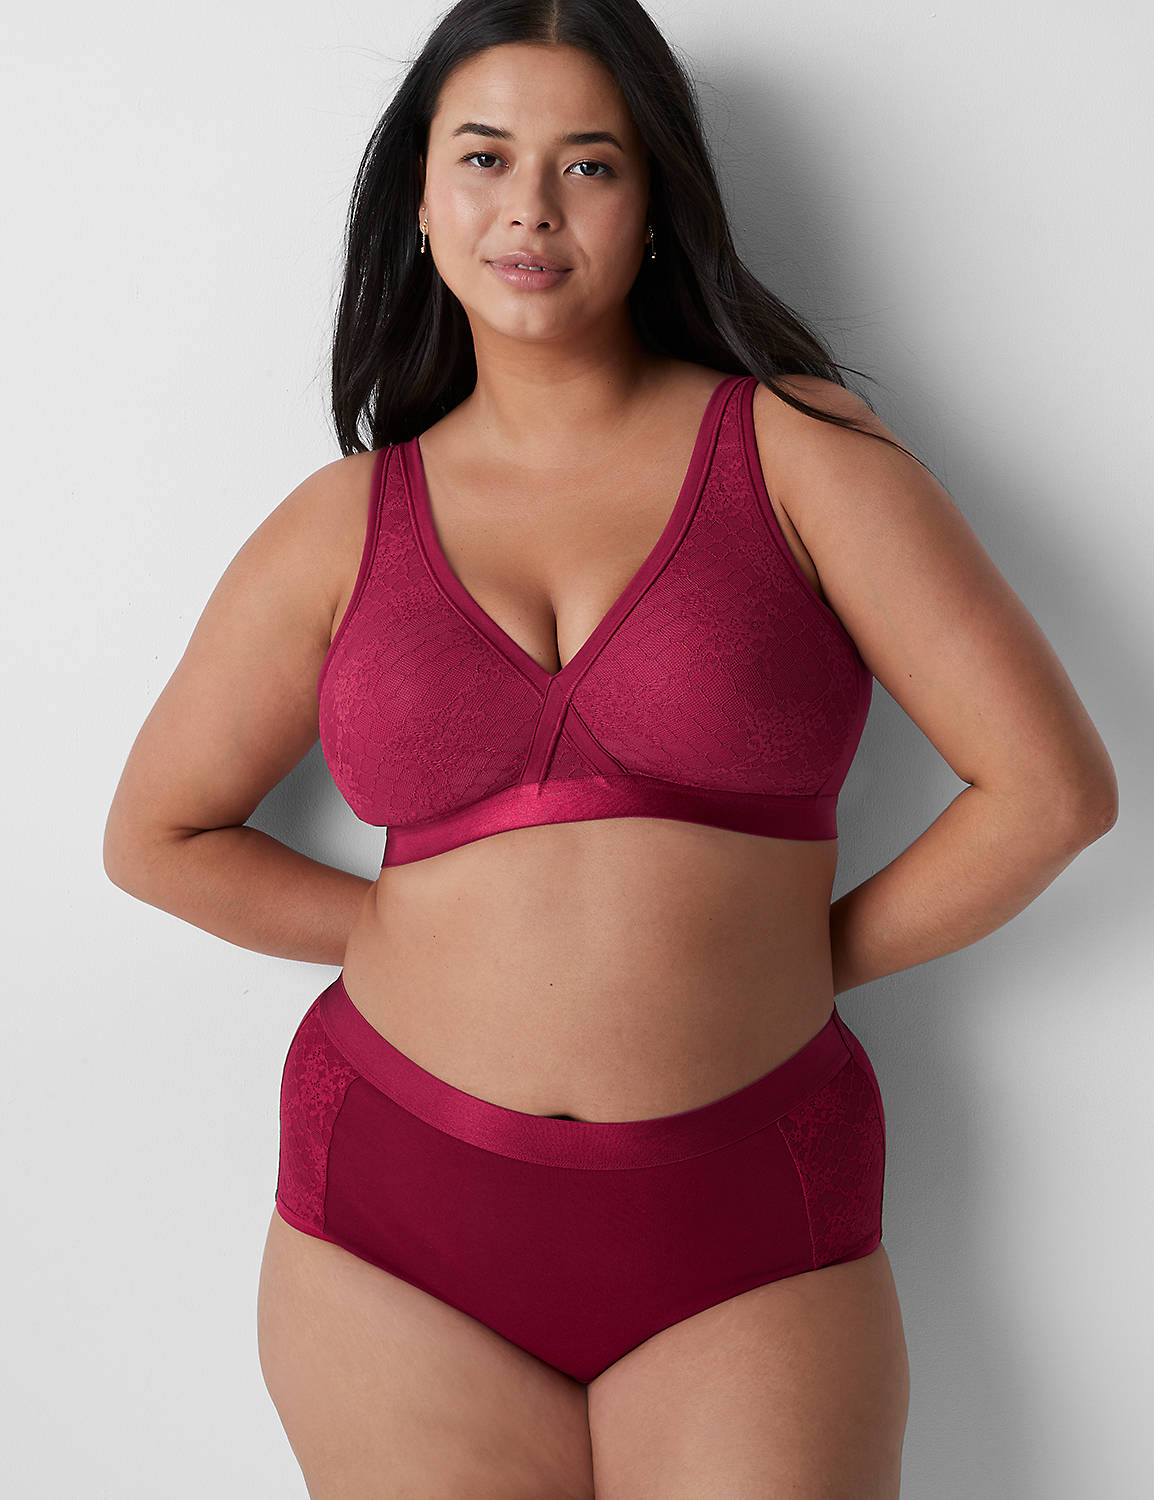 lane bryant cotton unlined no-wire bra with lace 48ddd beet red